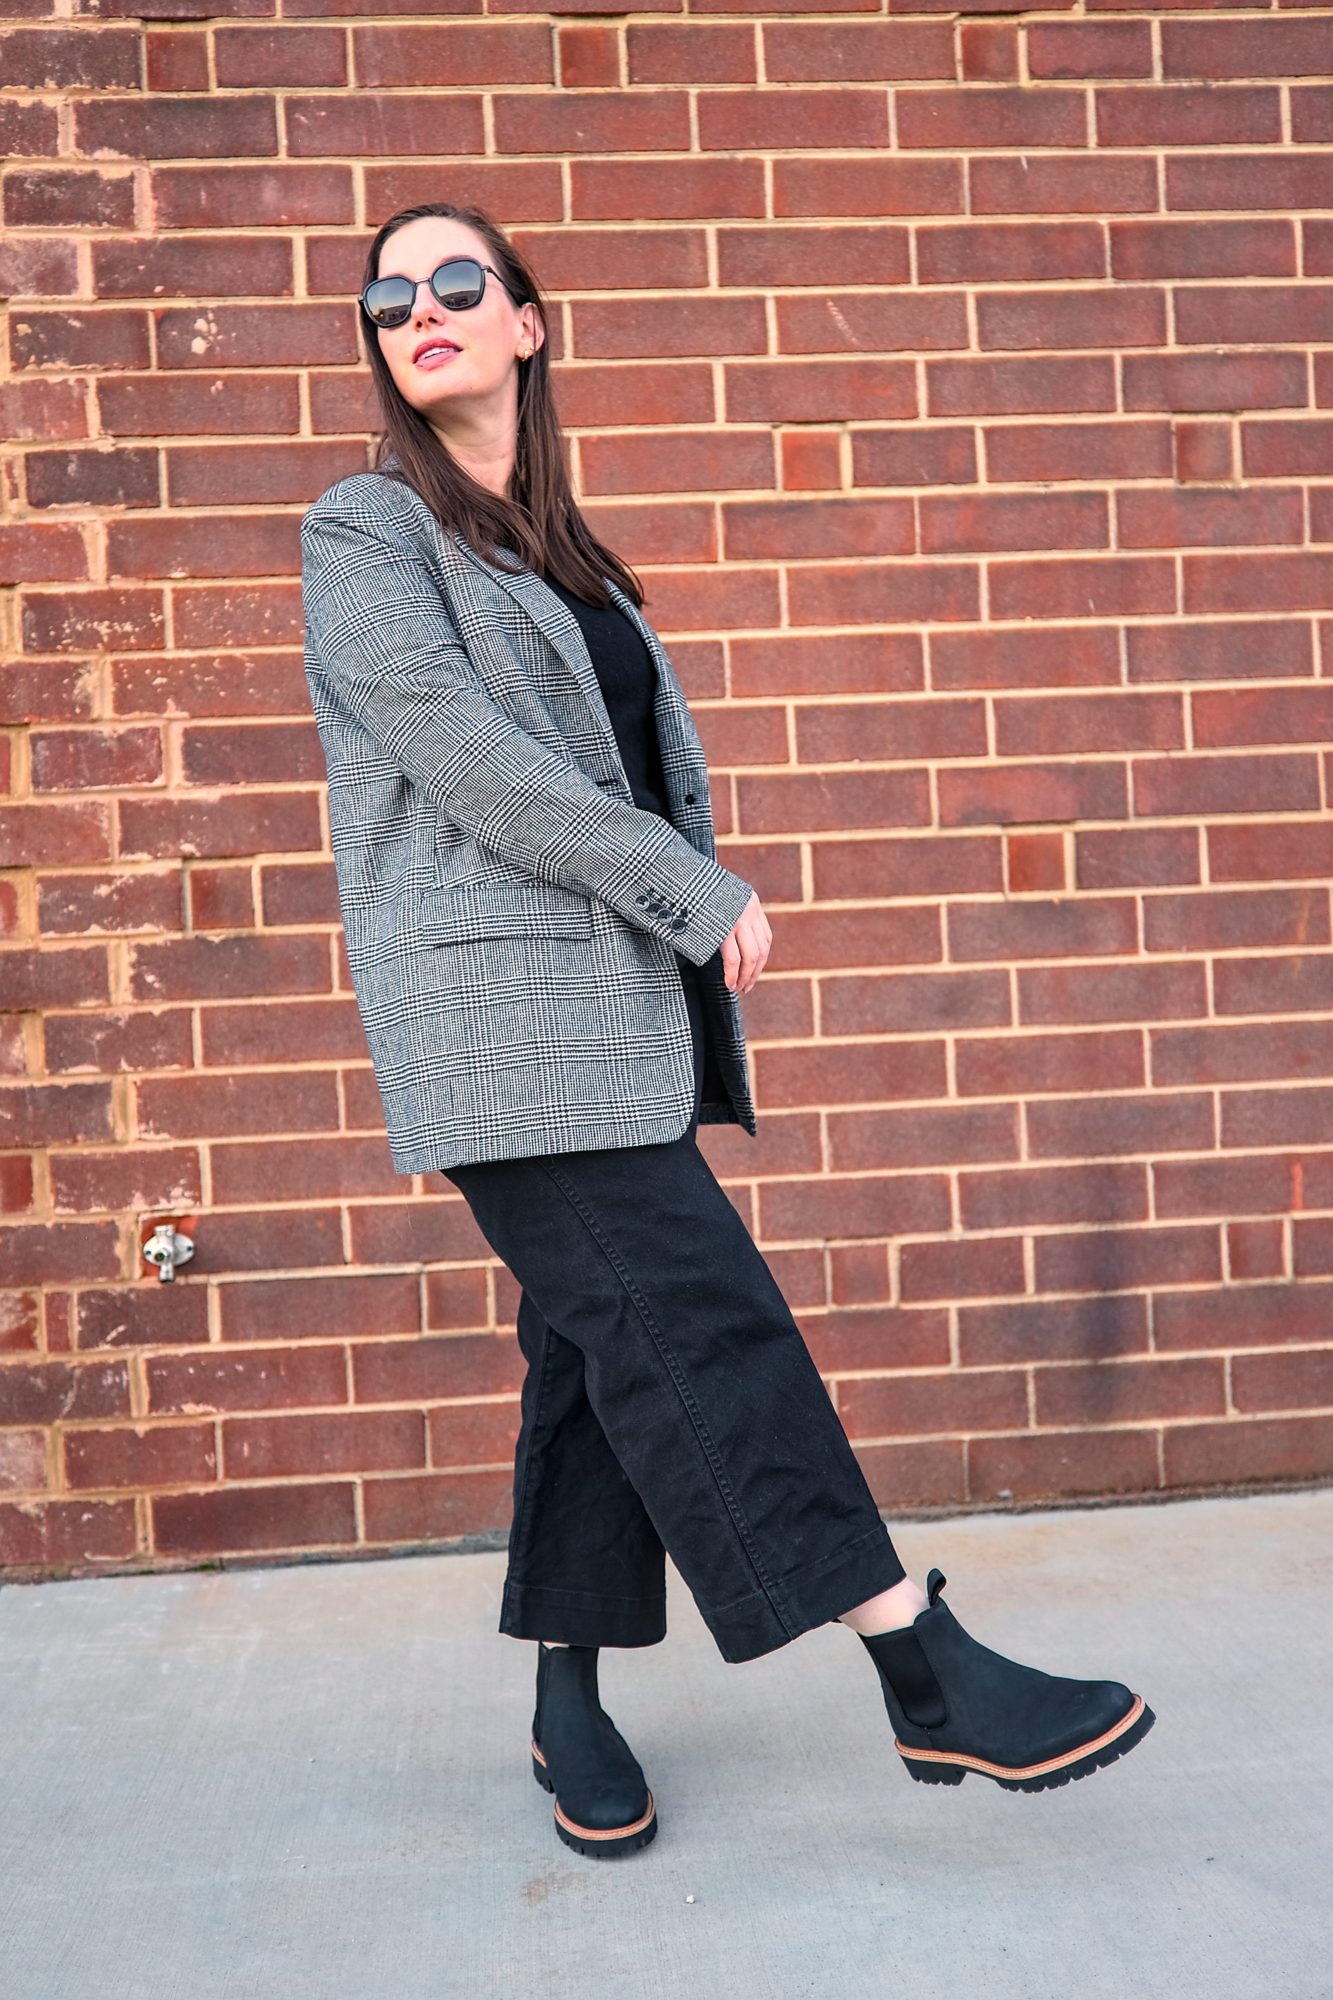 Alyssa wears the Go-To Lug Chelsea Boot with a plaid blazer and black pants and kicks a foot in front of her